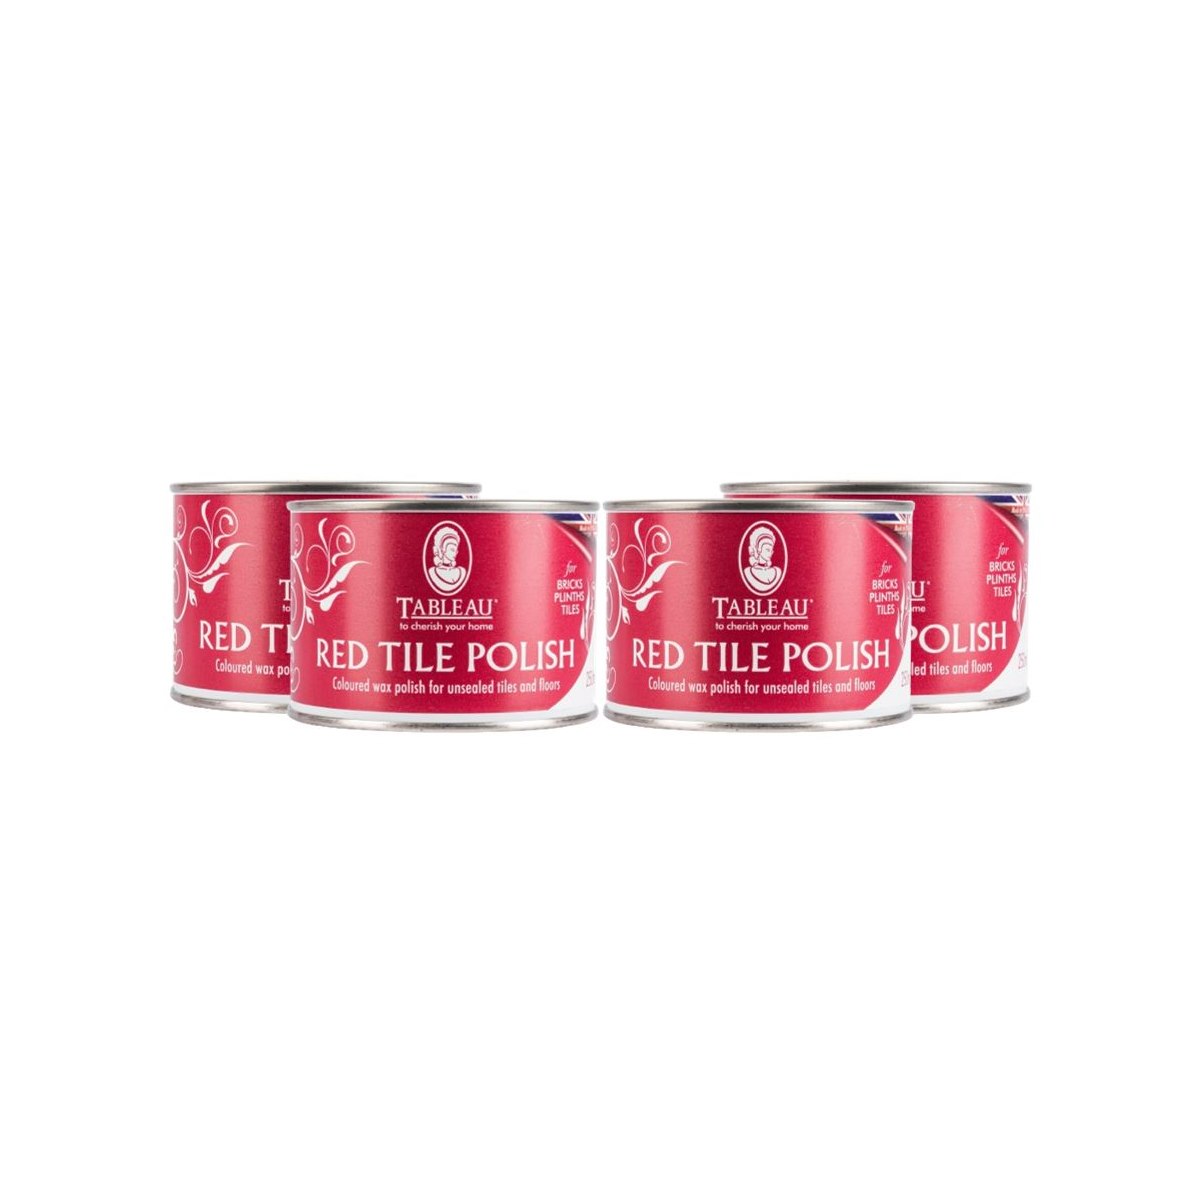 Case of 4 x Tableau Red Tile Polish 250ml